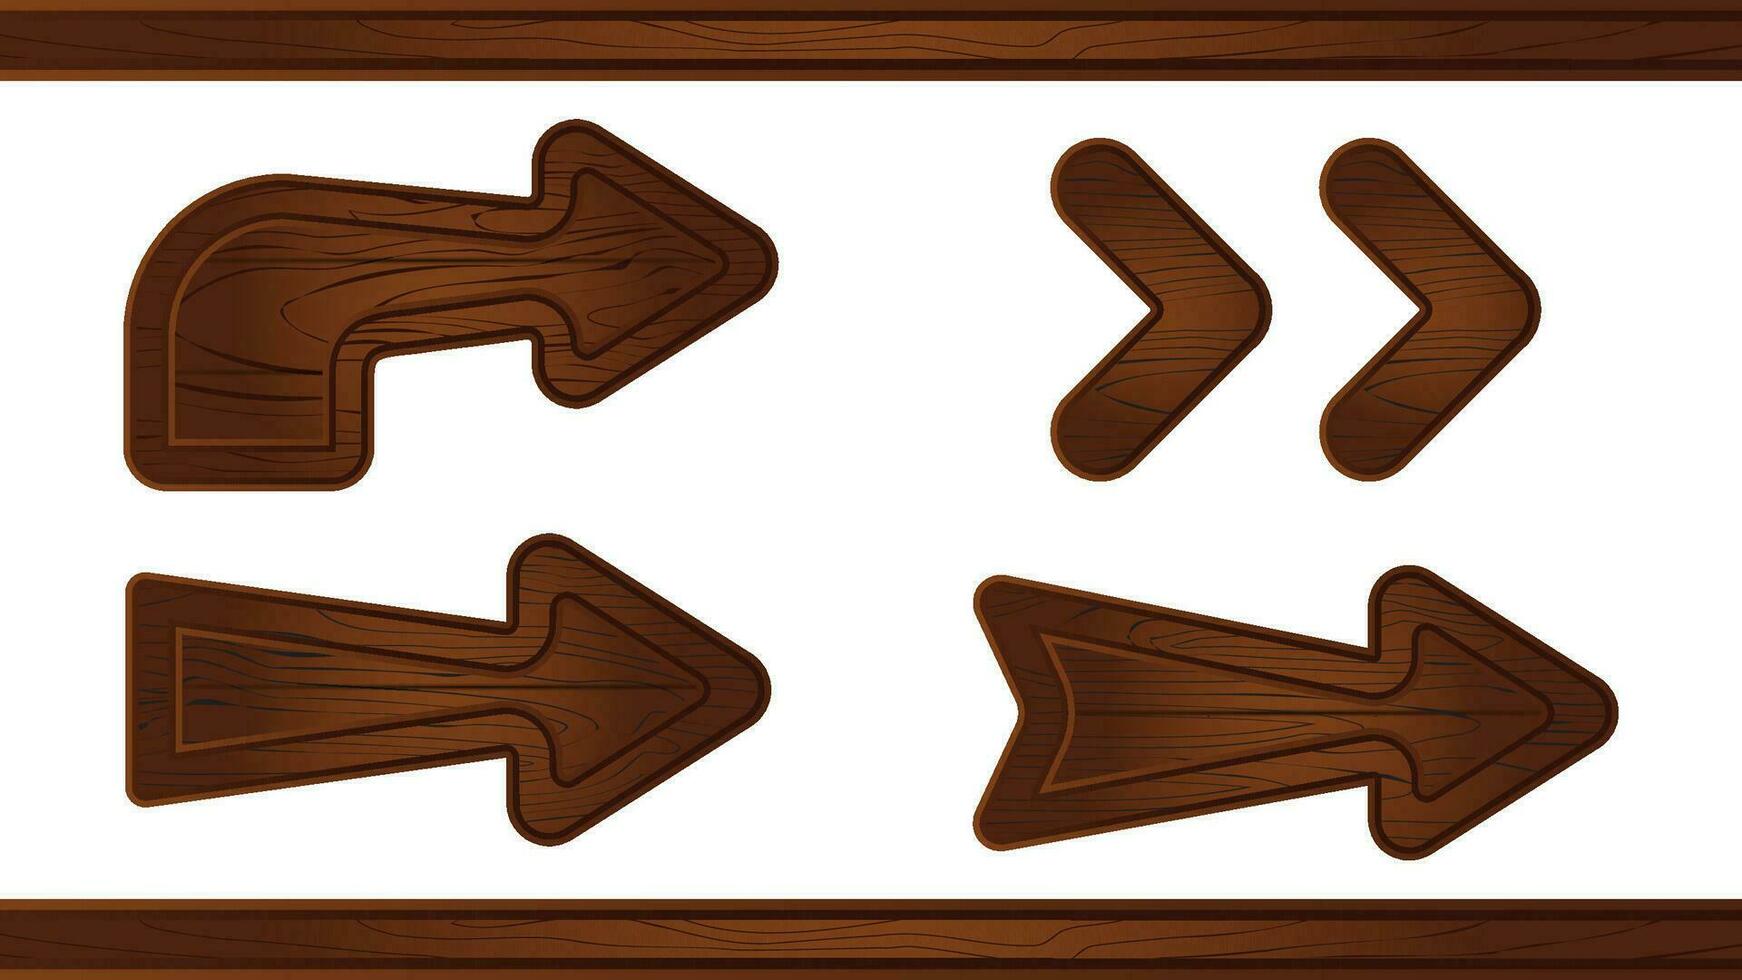 Wooden arrow sign board. Wood road pointer panel cartoon icon set. Empty isolated rustic timber plaque design for message or indicator. Game information frame vintage brown label illustration. vector